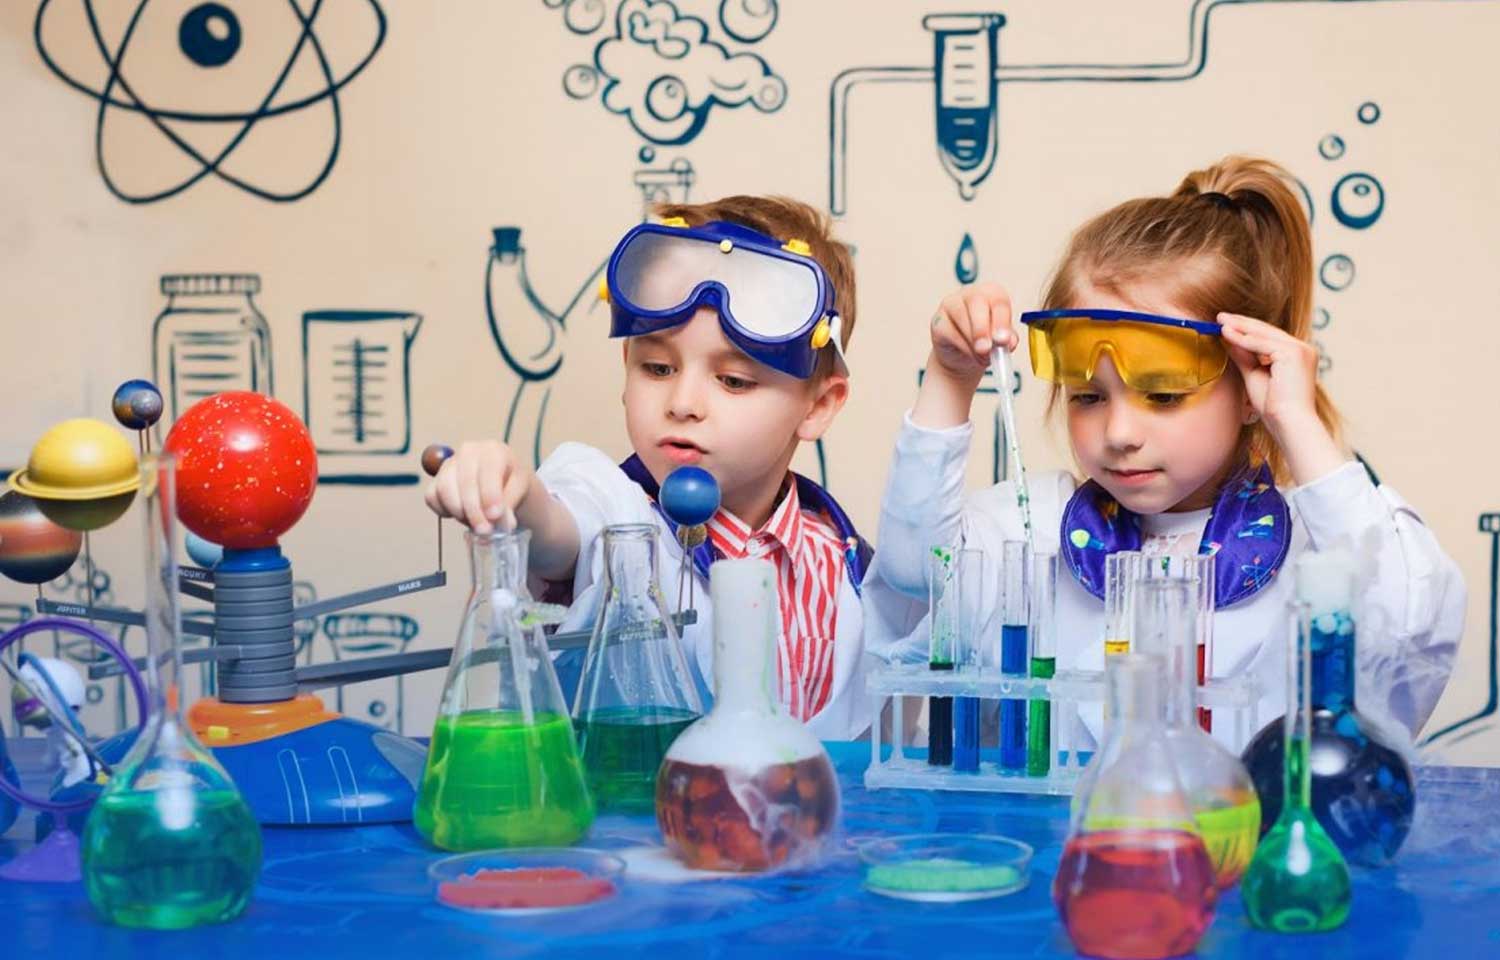 Building a STEM Lab in Schools: A Step-by-Step Guide